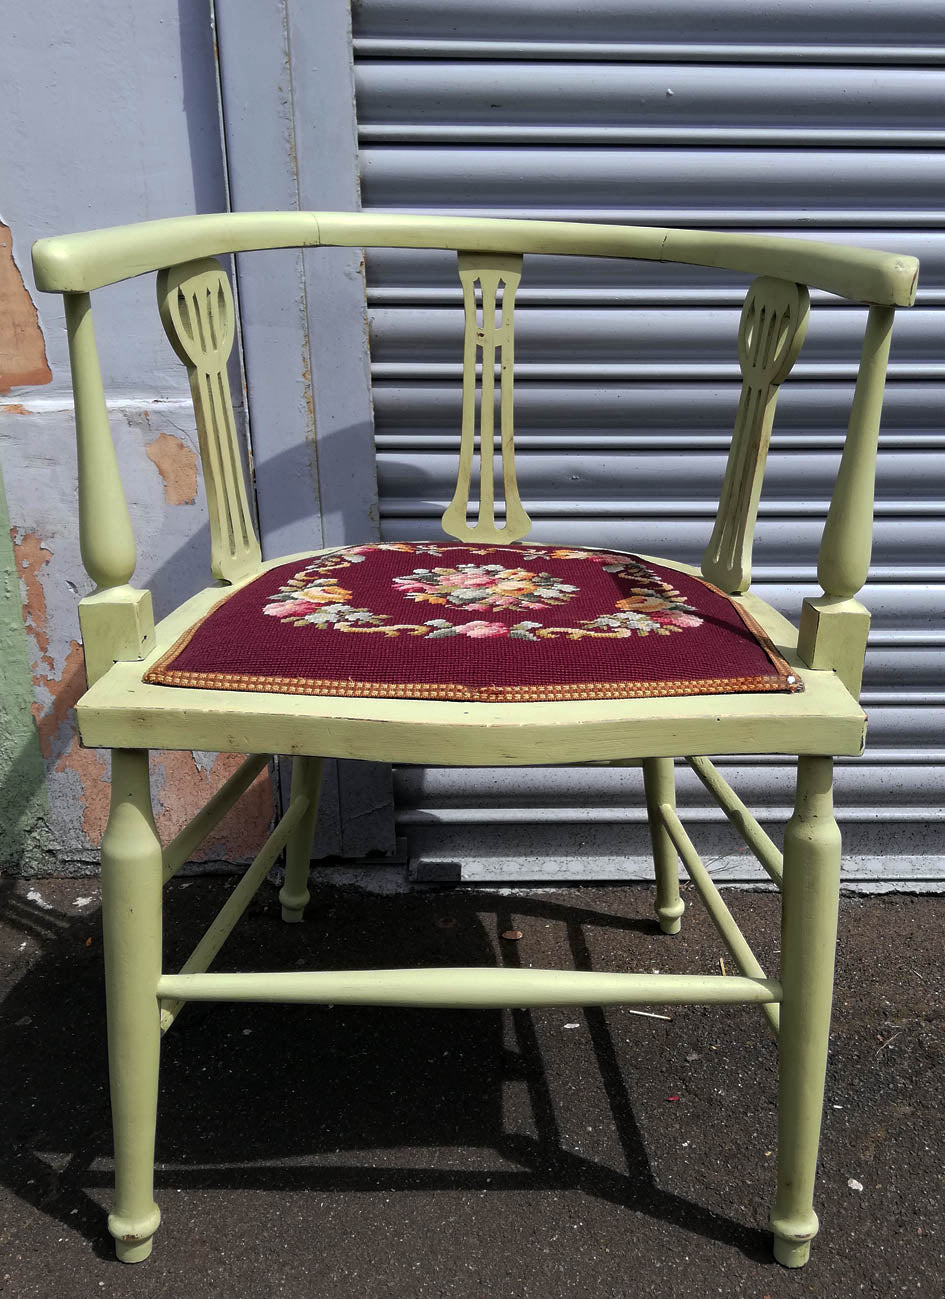 Vintage needlepoint bedroom chair painted in a soft apple green